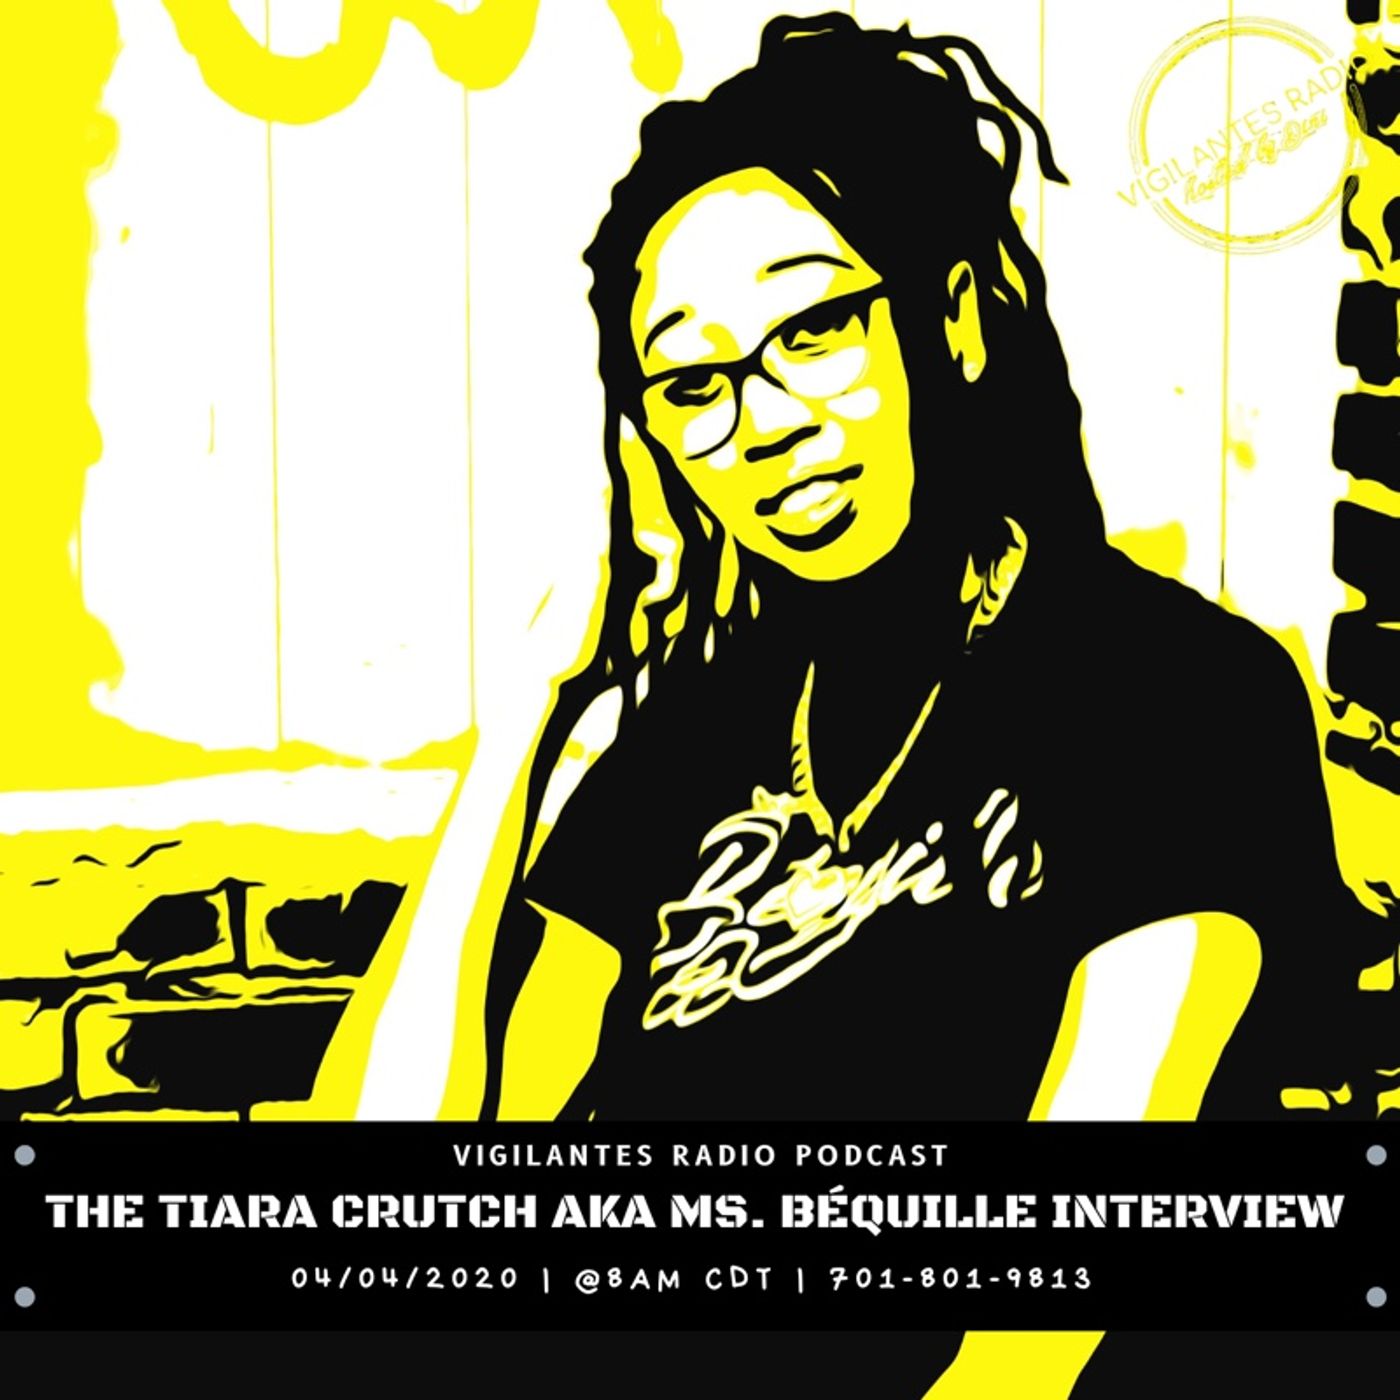 The Tiara Crutch aka Ms. Béquille Interview. Image